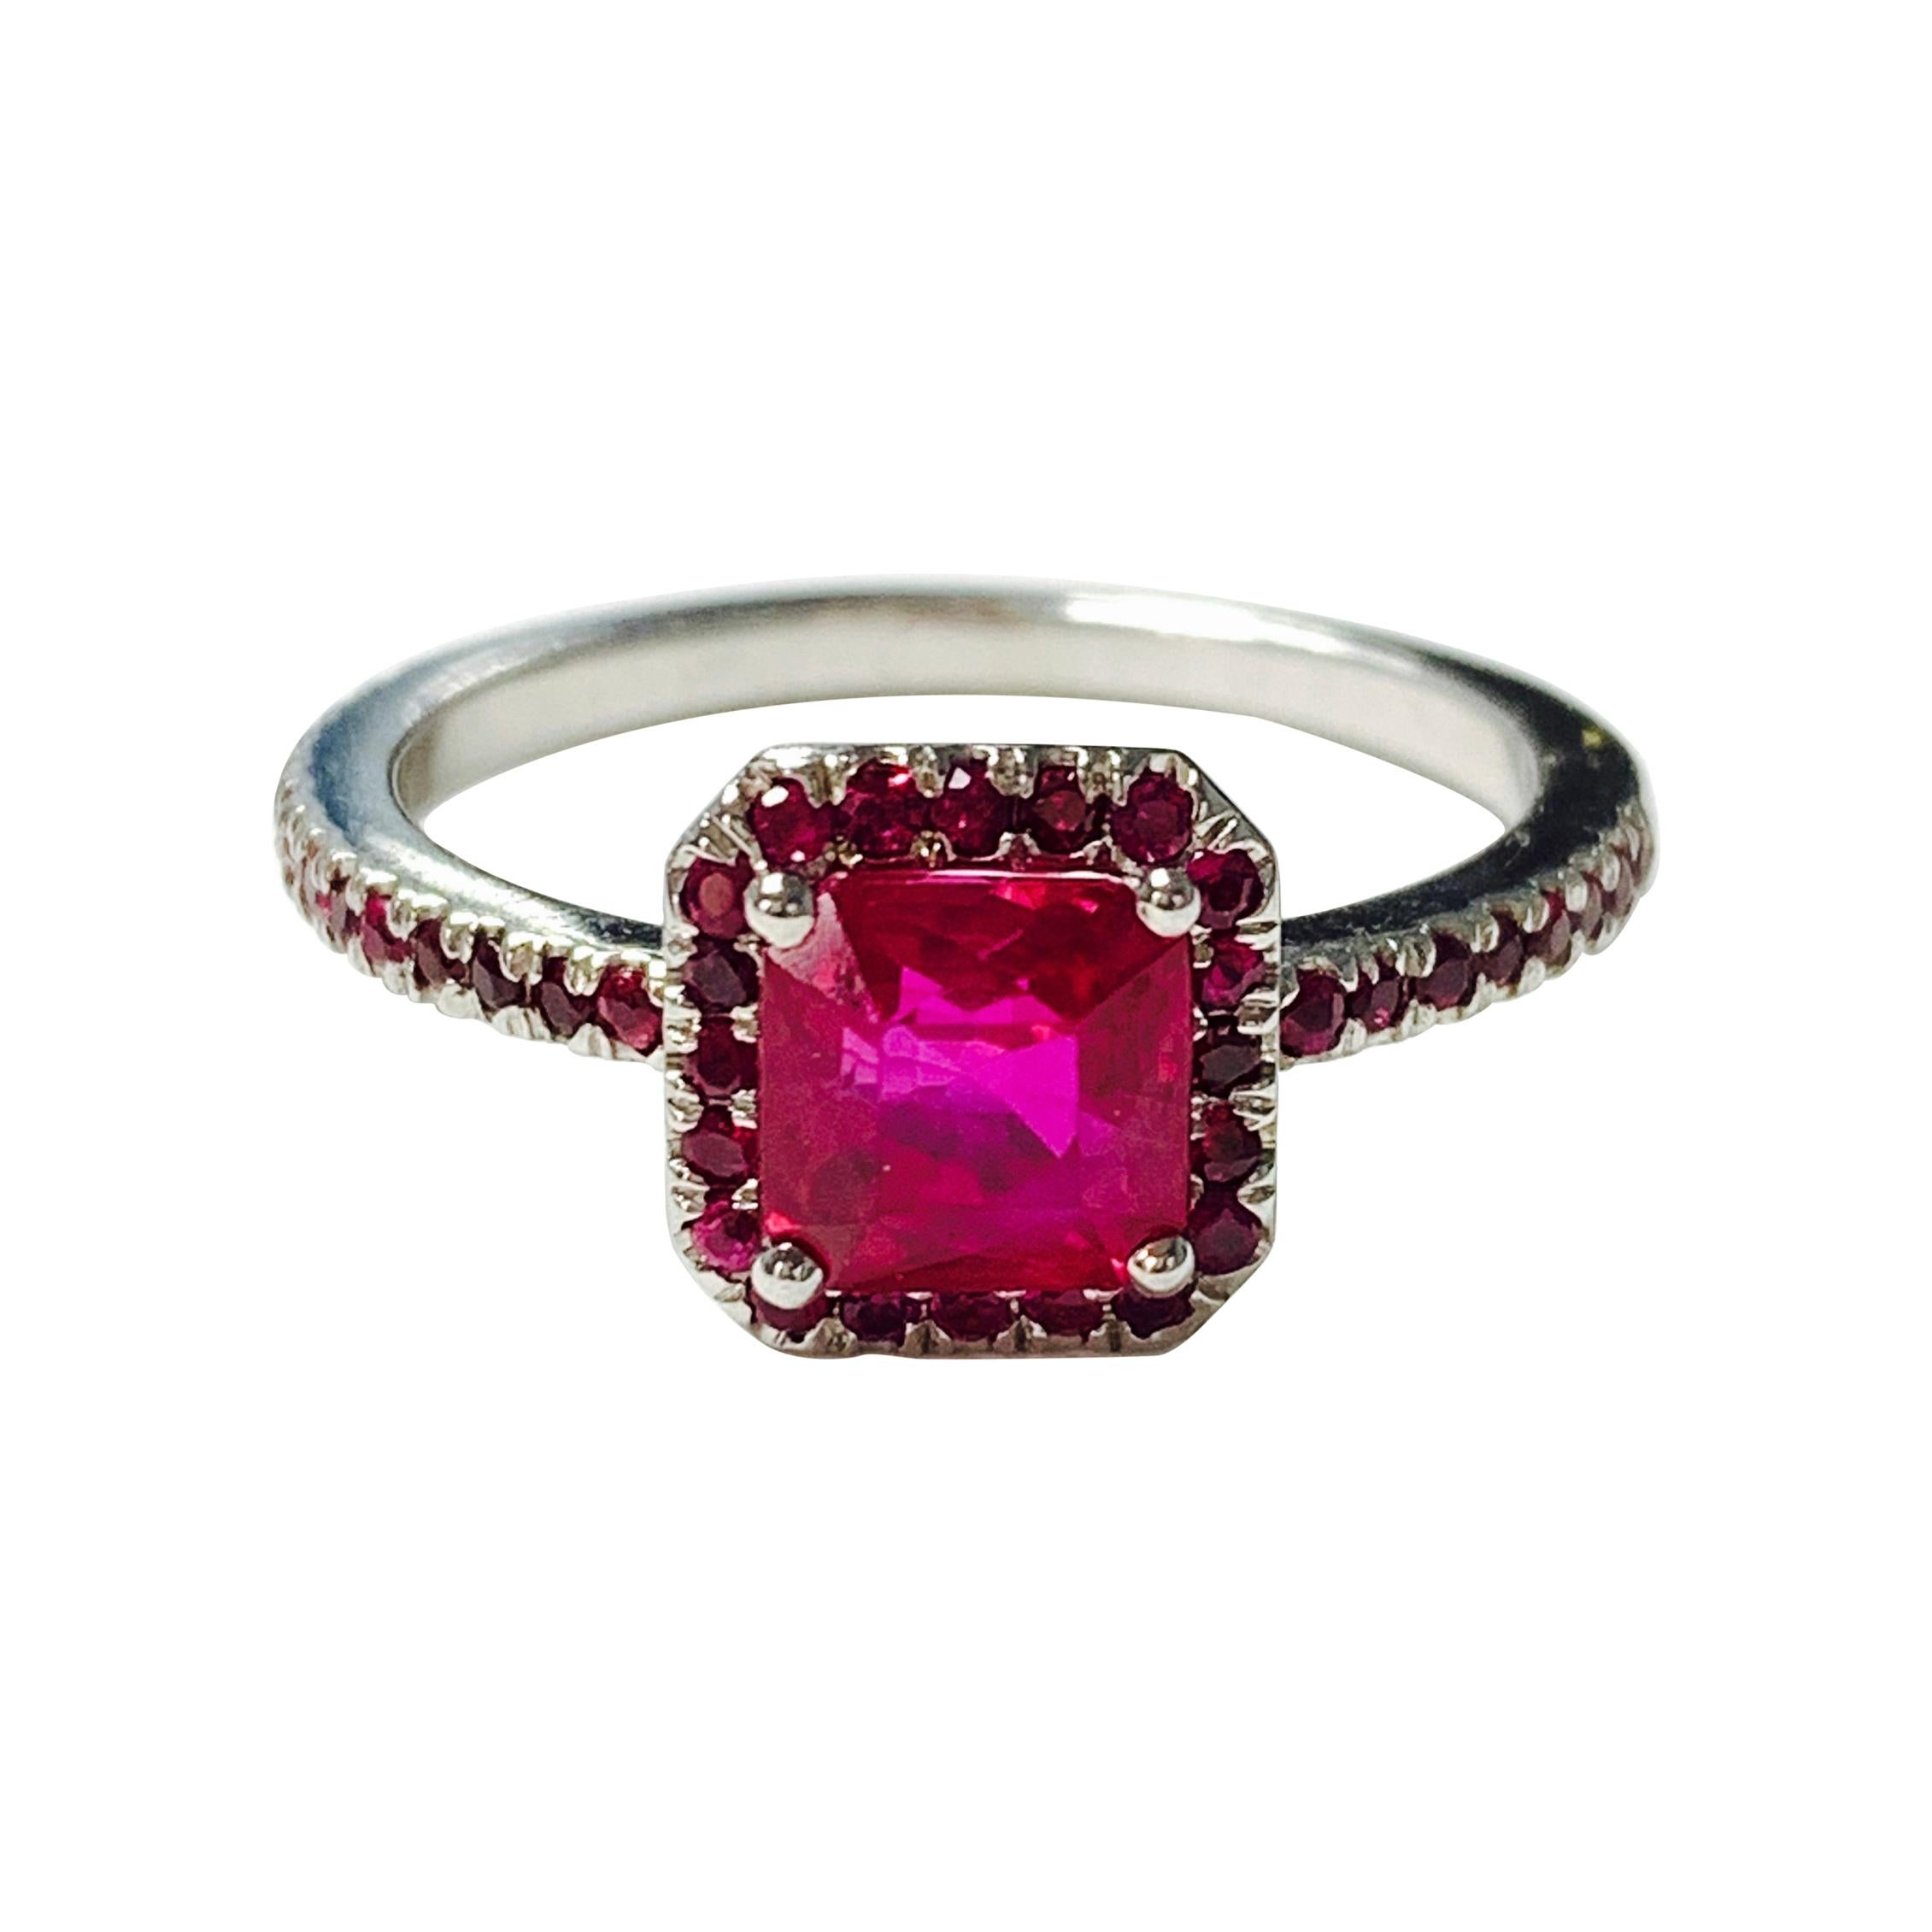 Square Emerald Cut Ruby Ring in 18k White Gold